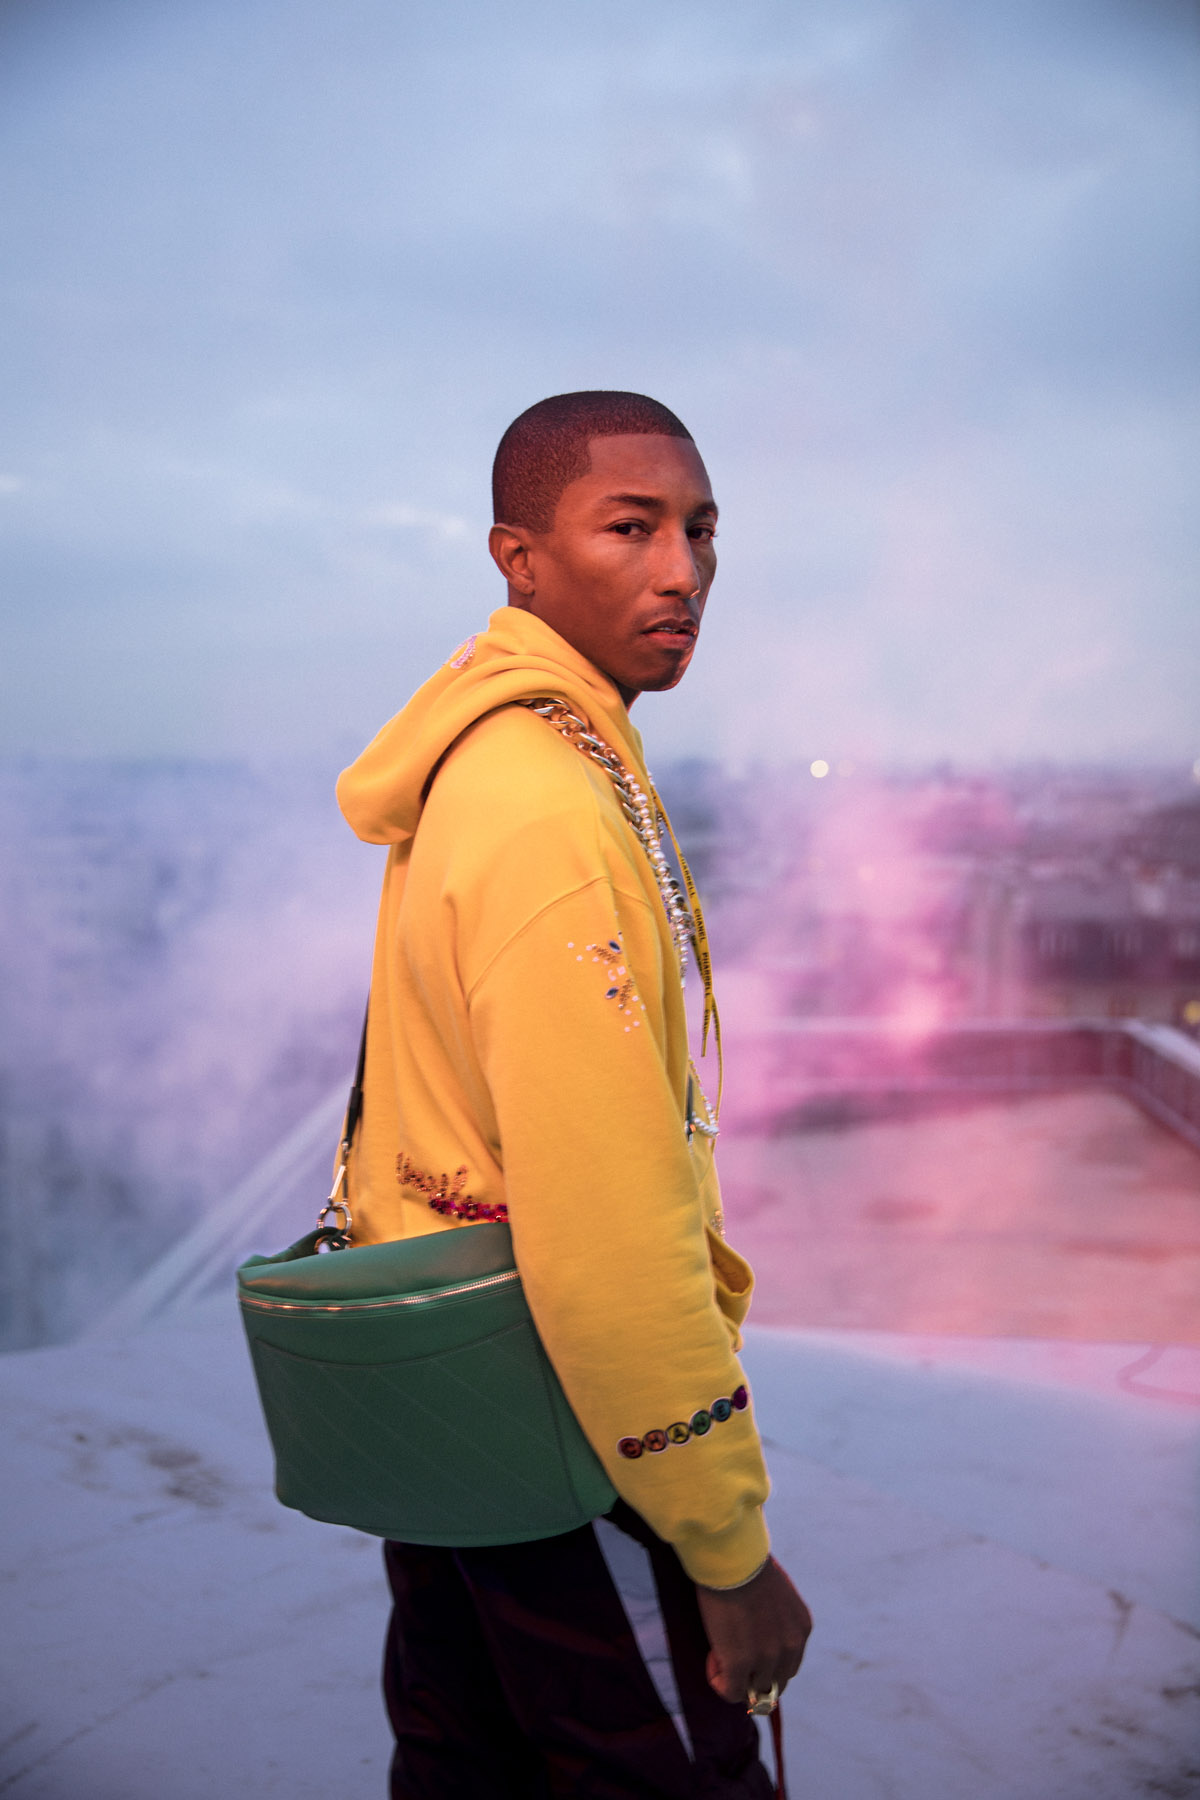 Style Icon Of The Week: Pharrell Williams, The Neptunes #1 fan